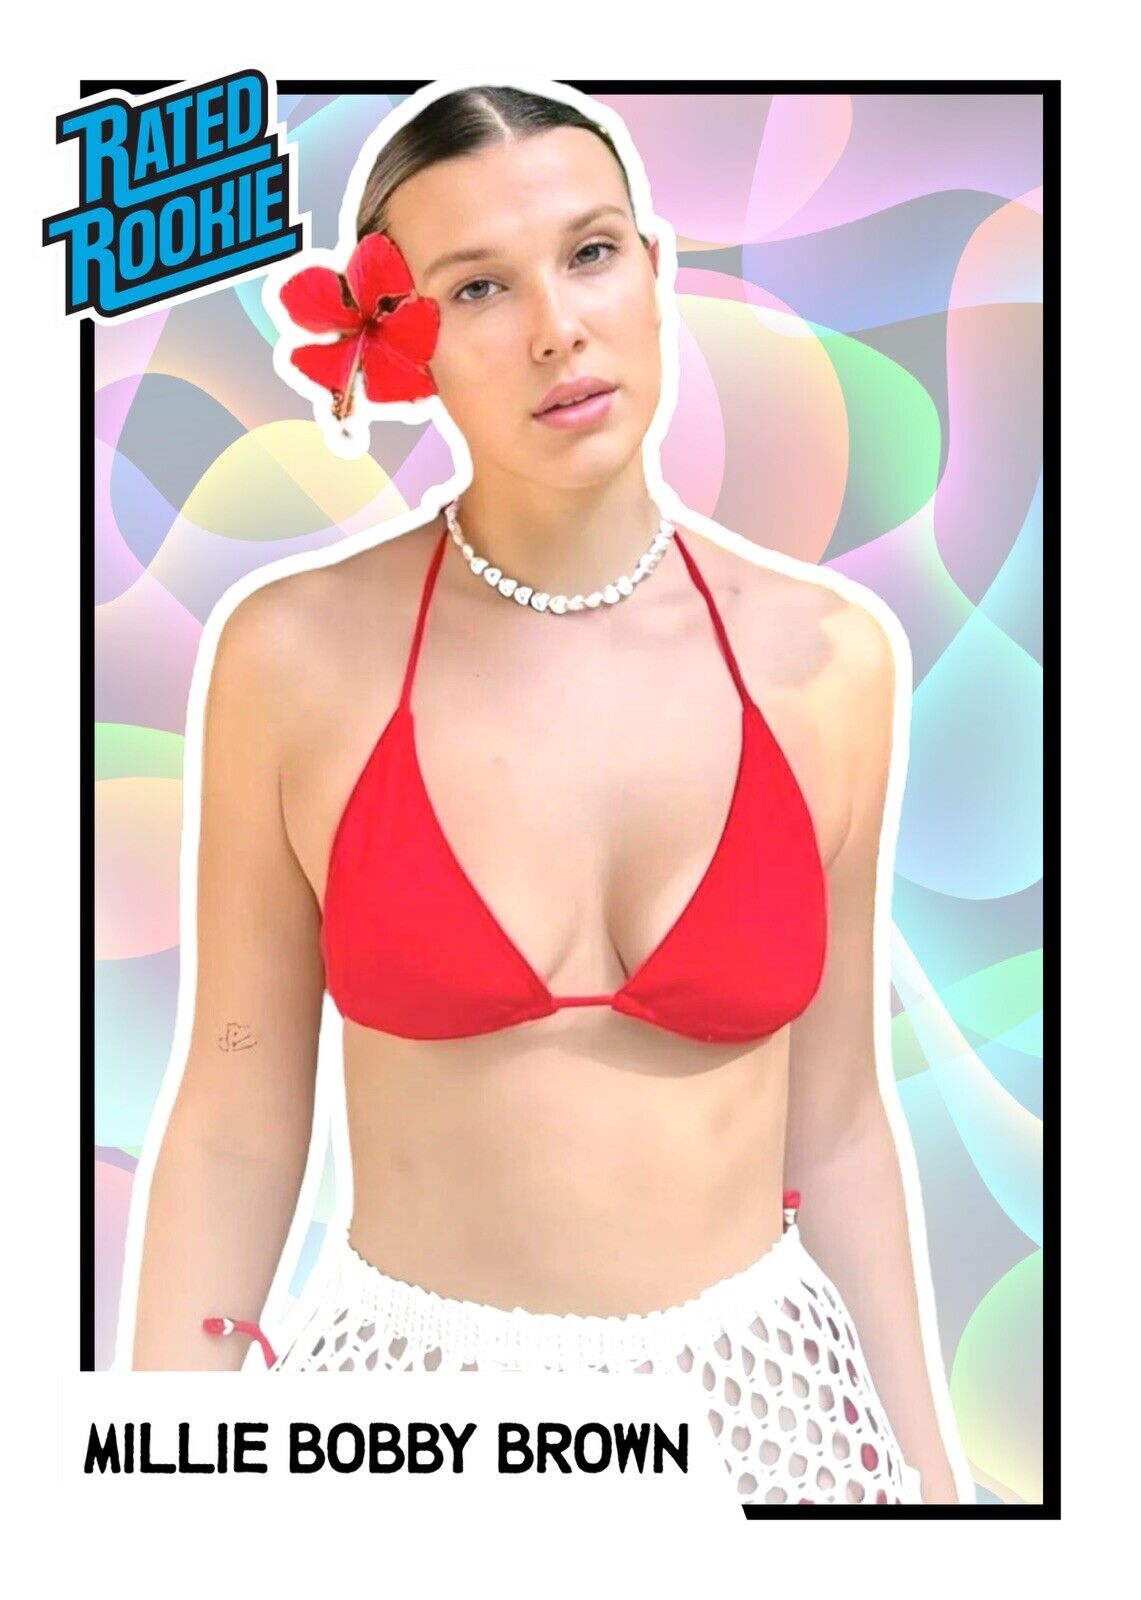 Millie Bobby Brown Custom Trading Card By MPRINTS /9 (Only 9 Printed)